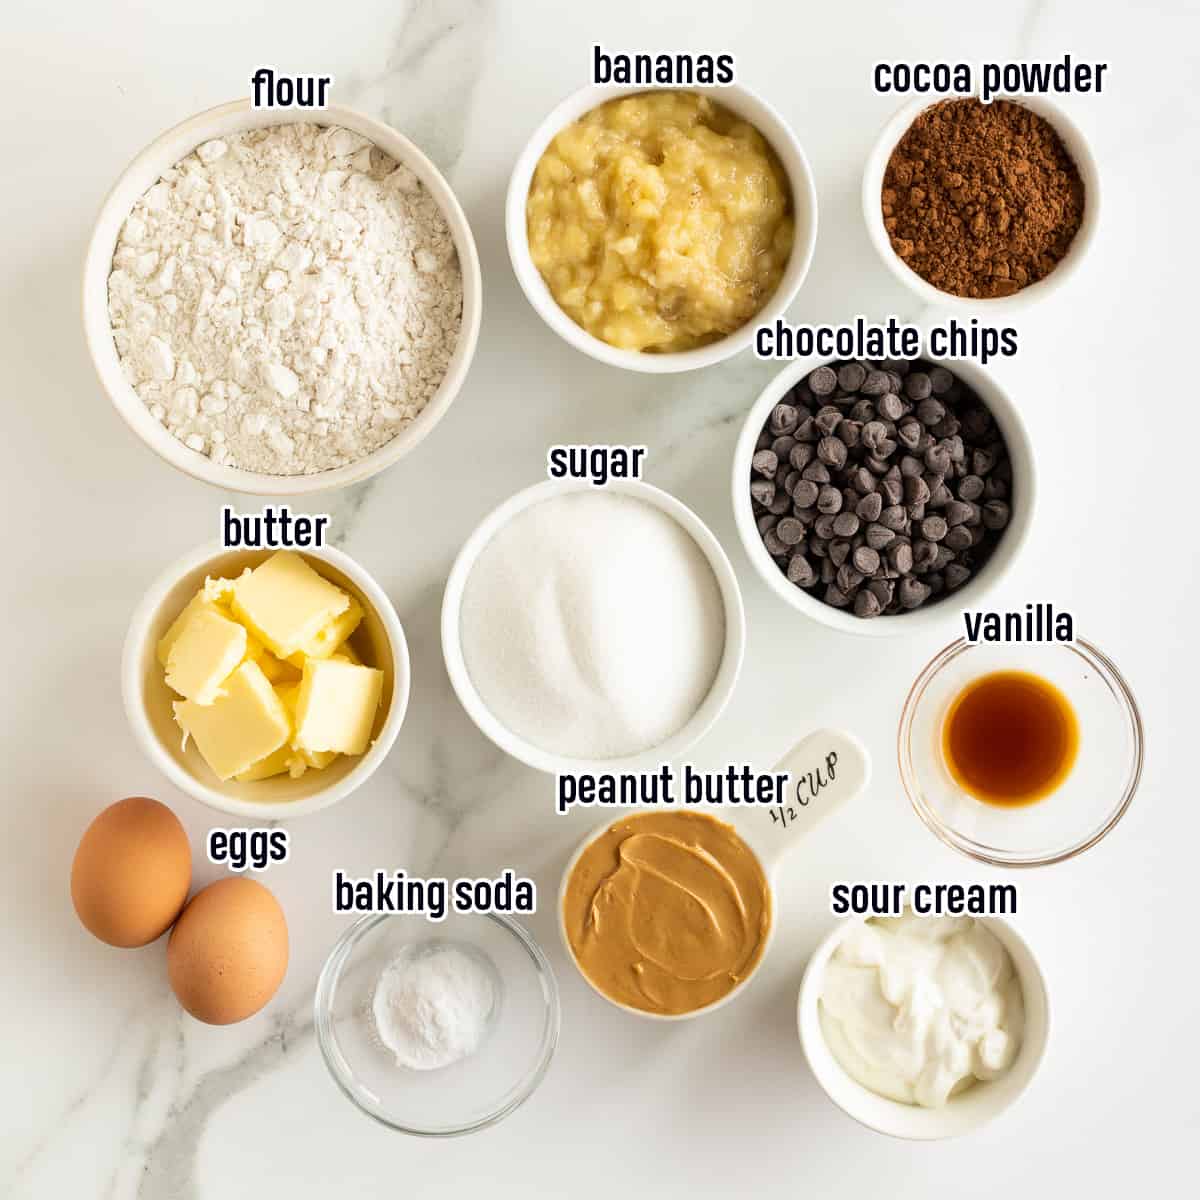 Flour, mashed bananas, chocolate chips and other ingredients in bowls with text.